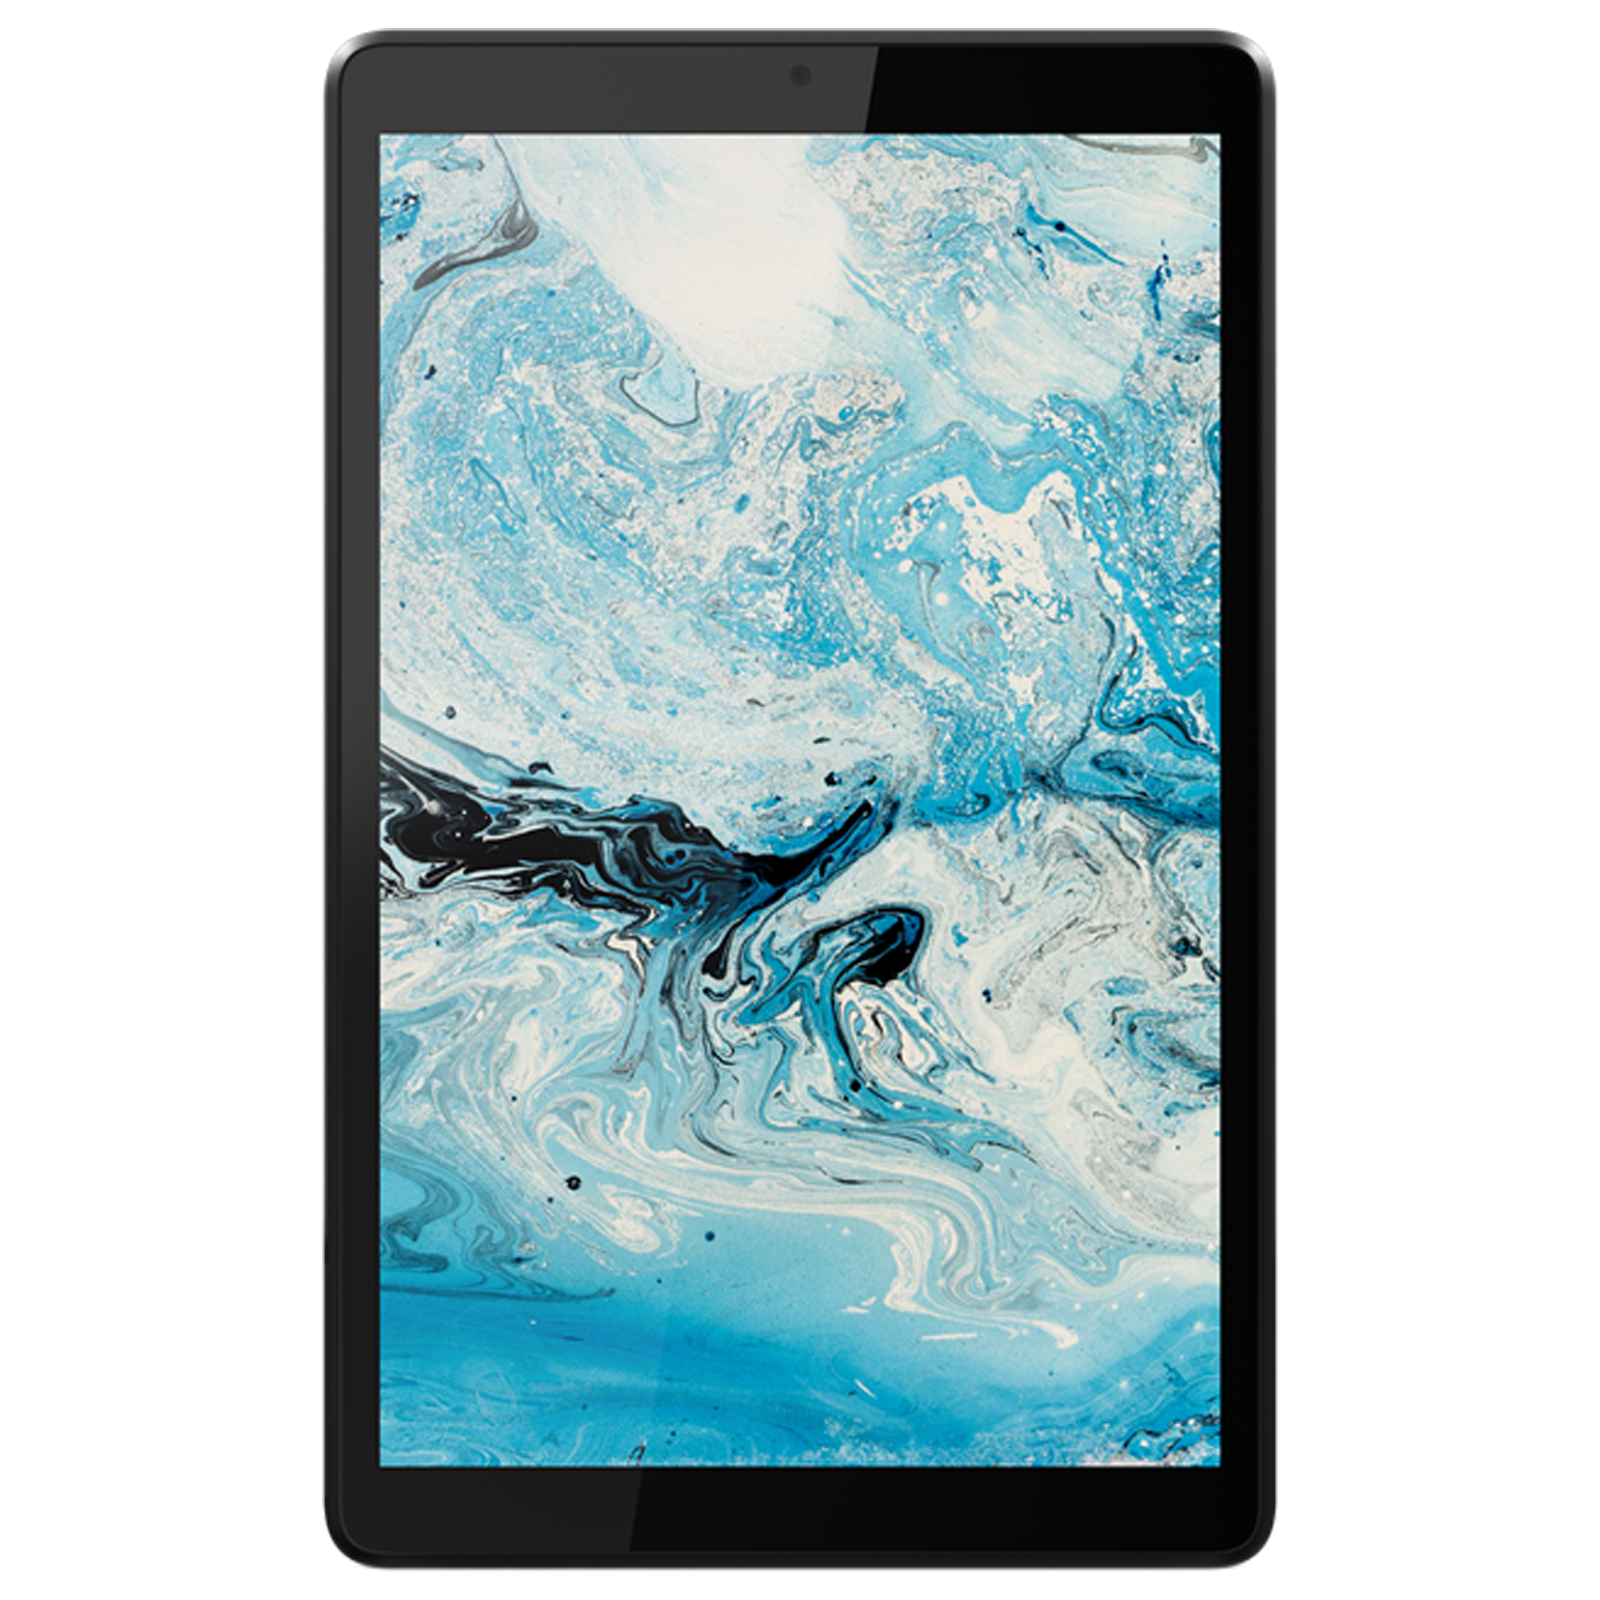 Lenovo Tab M8 (2nd Gen) FHD WiFi + 4G Android Tablet (Android 9.0 Pie, MediaTek Helio P22T, 20.32 cm (8 Inches), 3GB RAM, 32GB ROM, ZA6L0001IN, Platinum Grey)_1